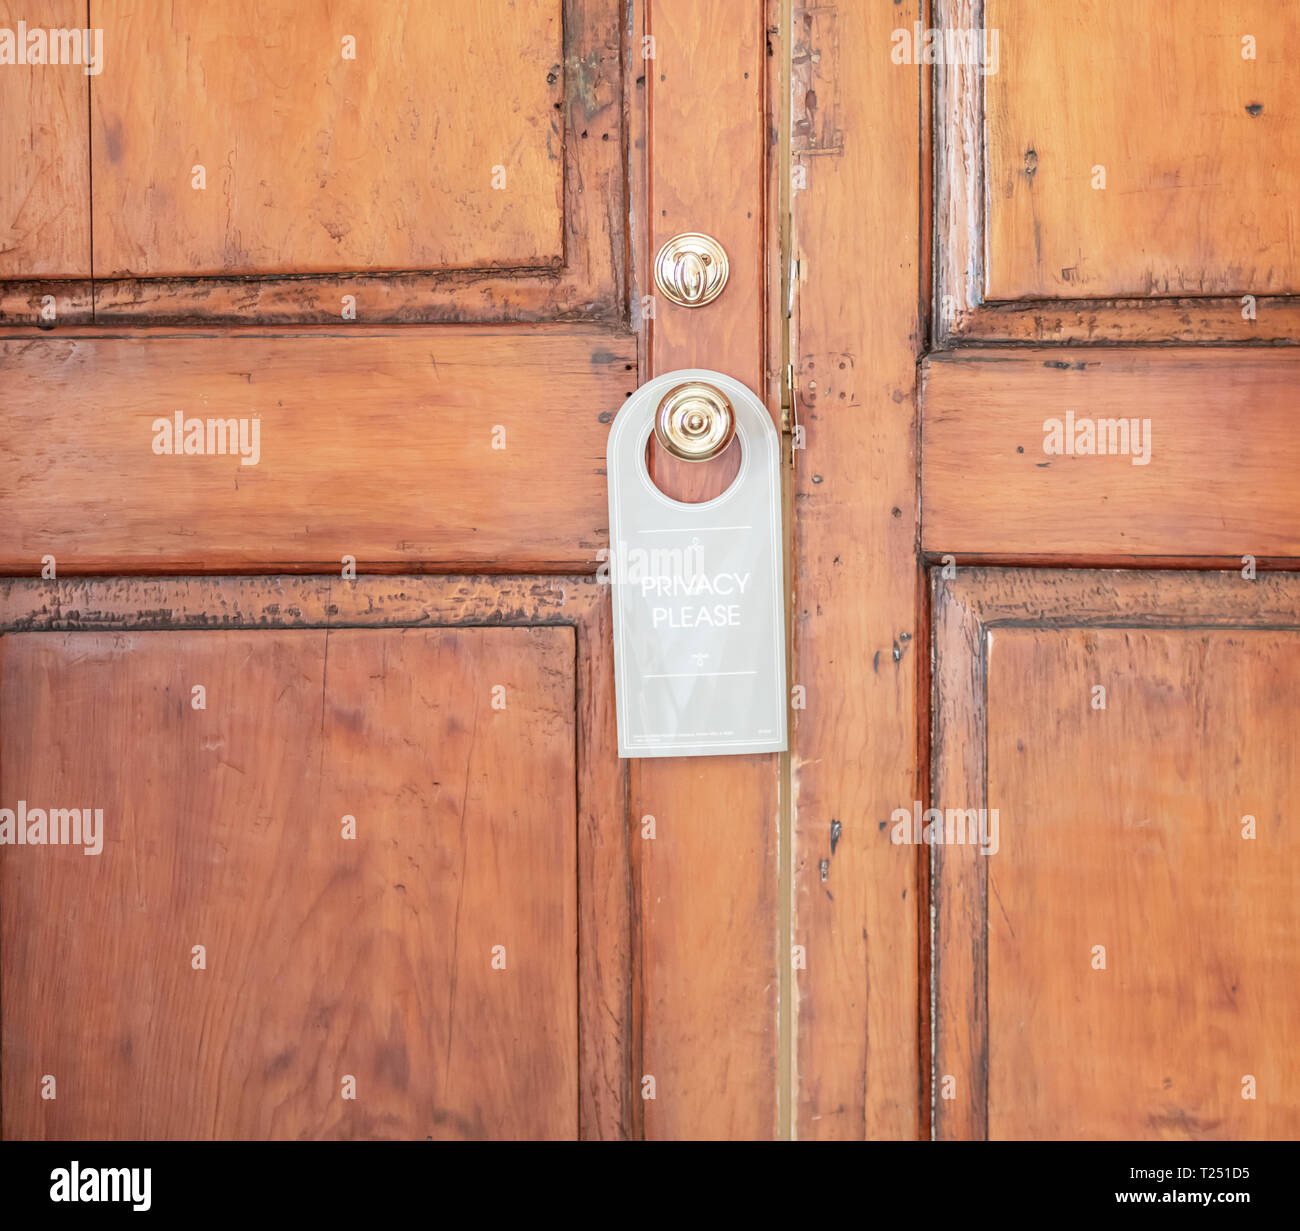 old wooden paneled door with a do no distrub sign hanging from the door knob. Stock Photo